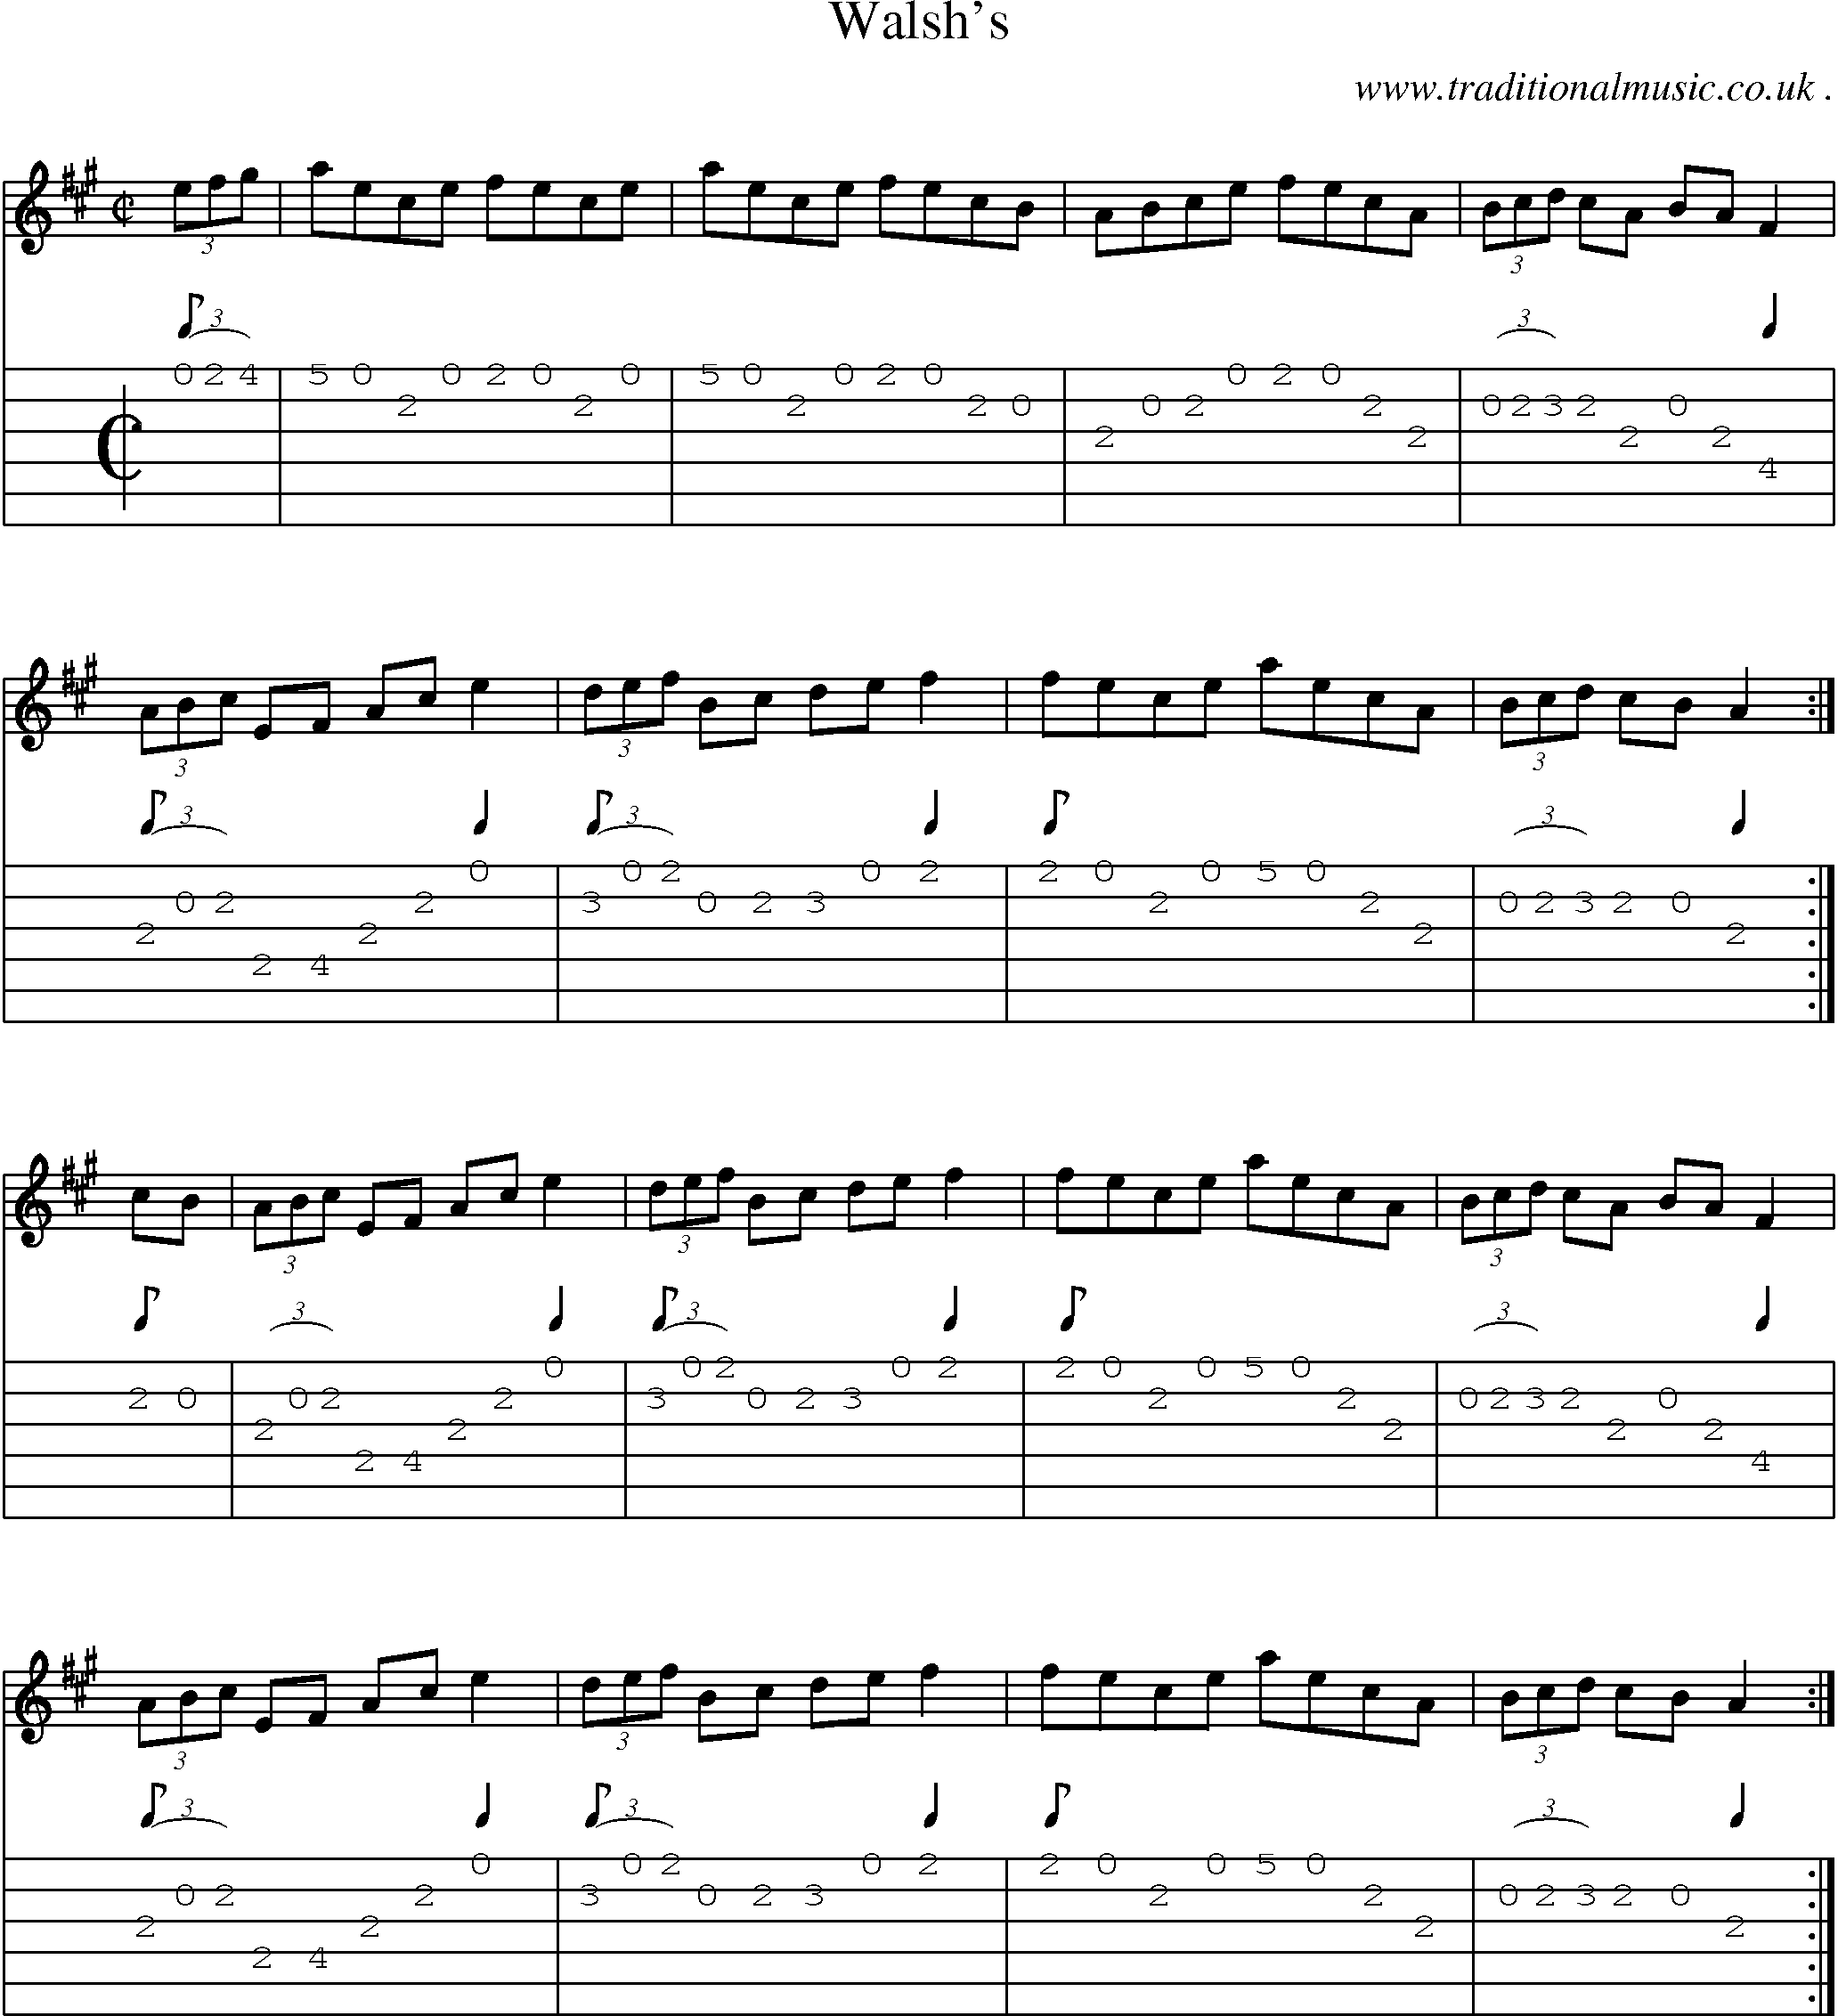 Sheet-Music and Guitar Tabs for Walshs